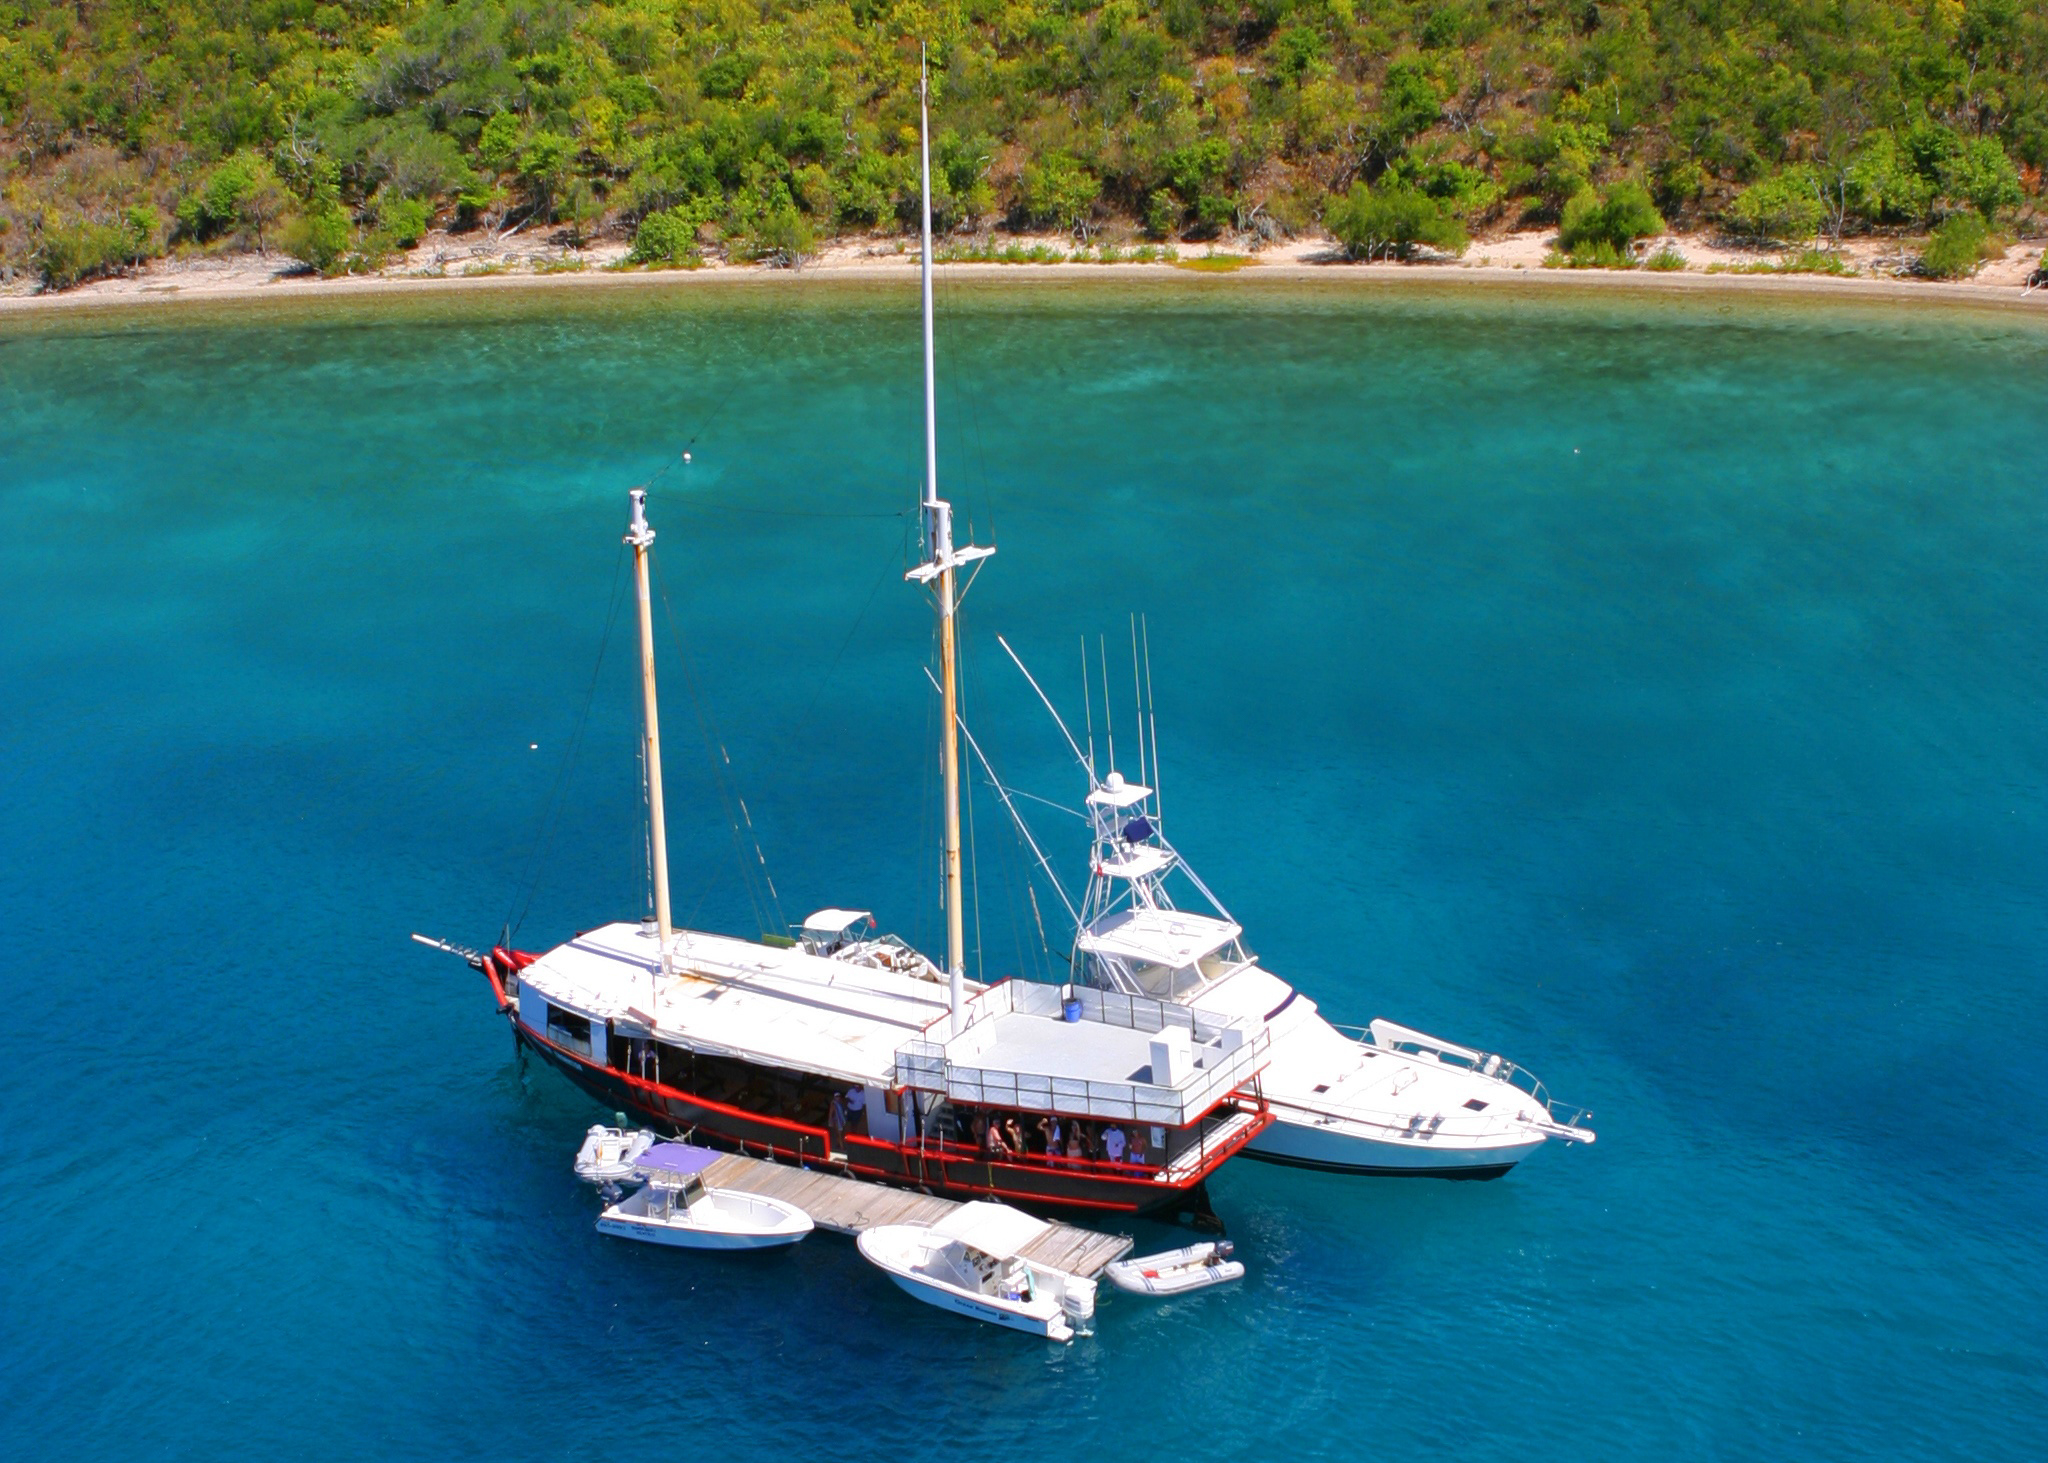 BVI willy t boat from above